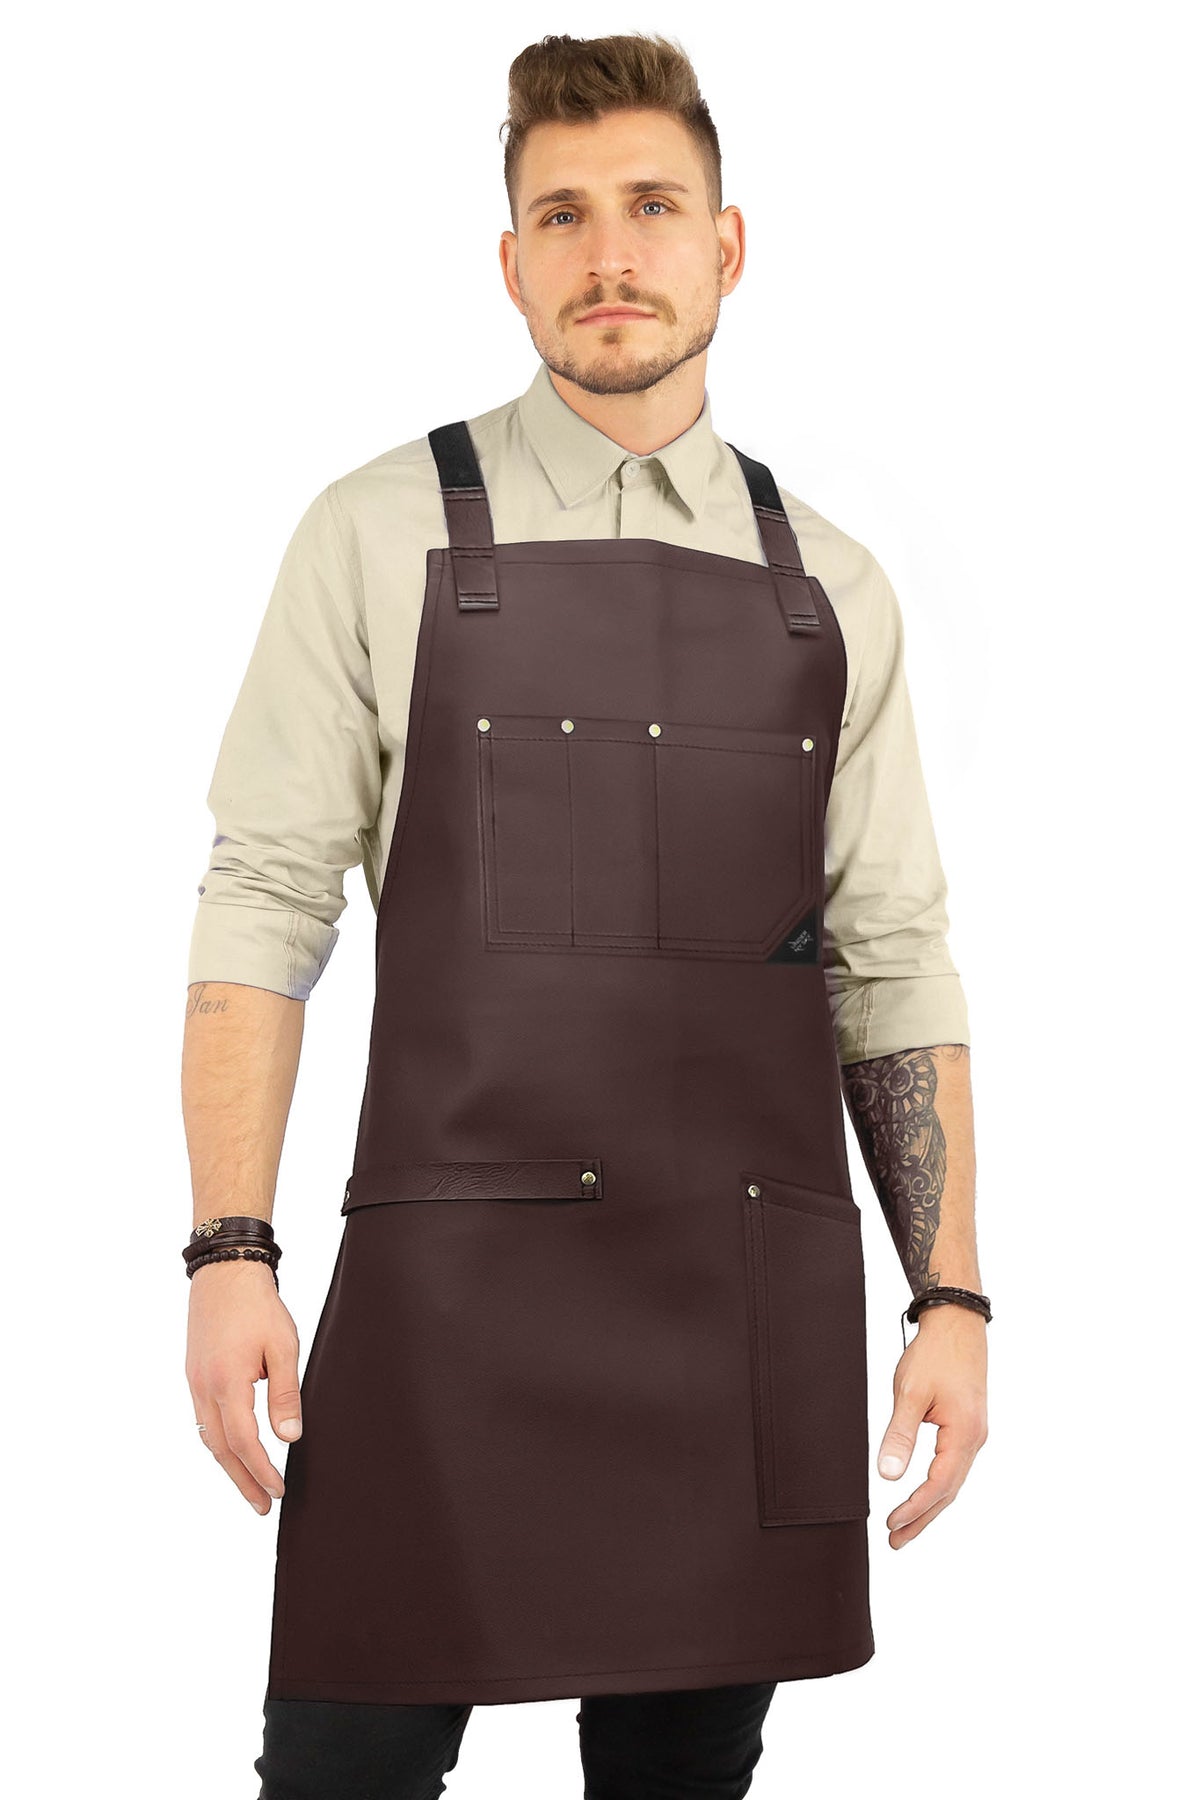 Leather Apron, Cross-back Straps, Reinforced, for Barbers - Vegan Leather - Black or Brown - Under NY Sky